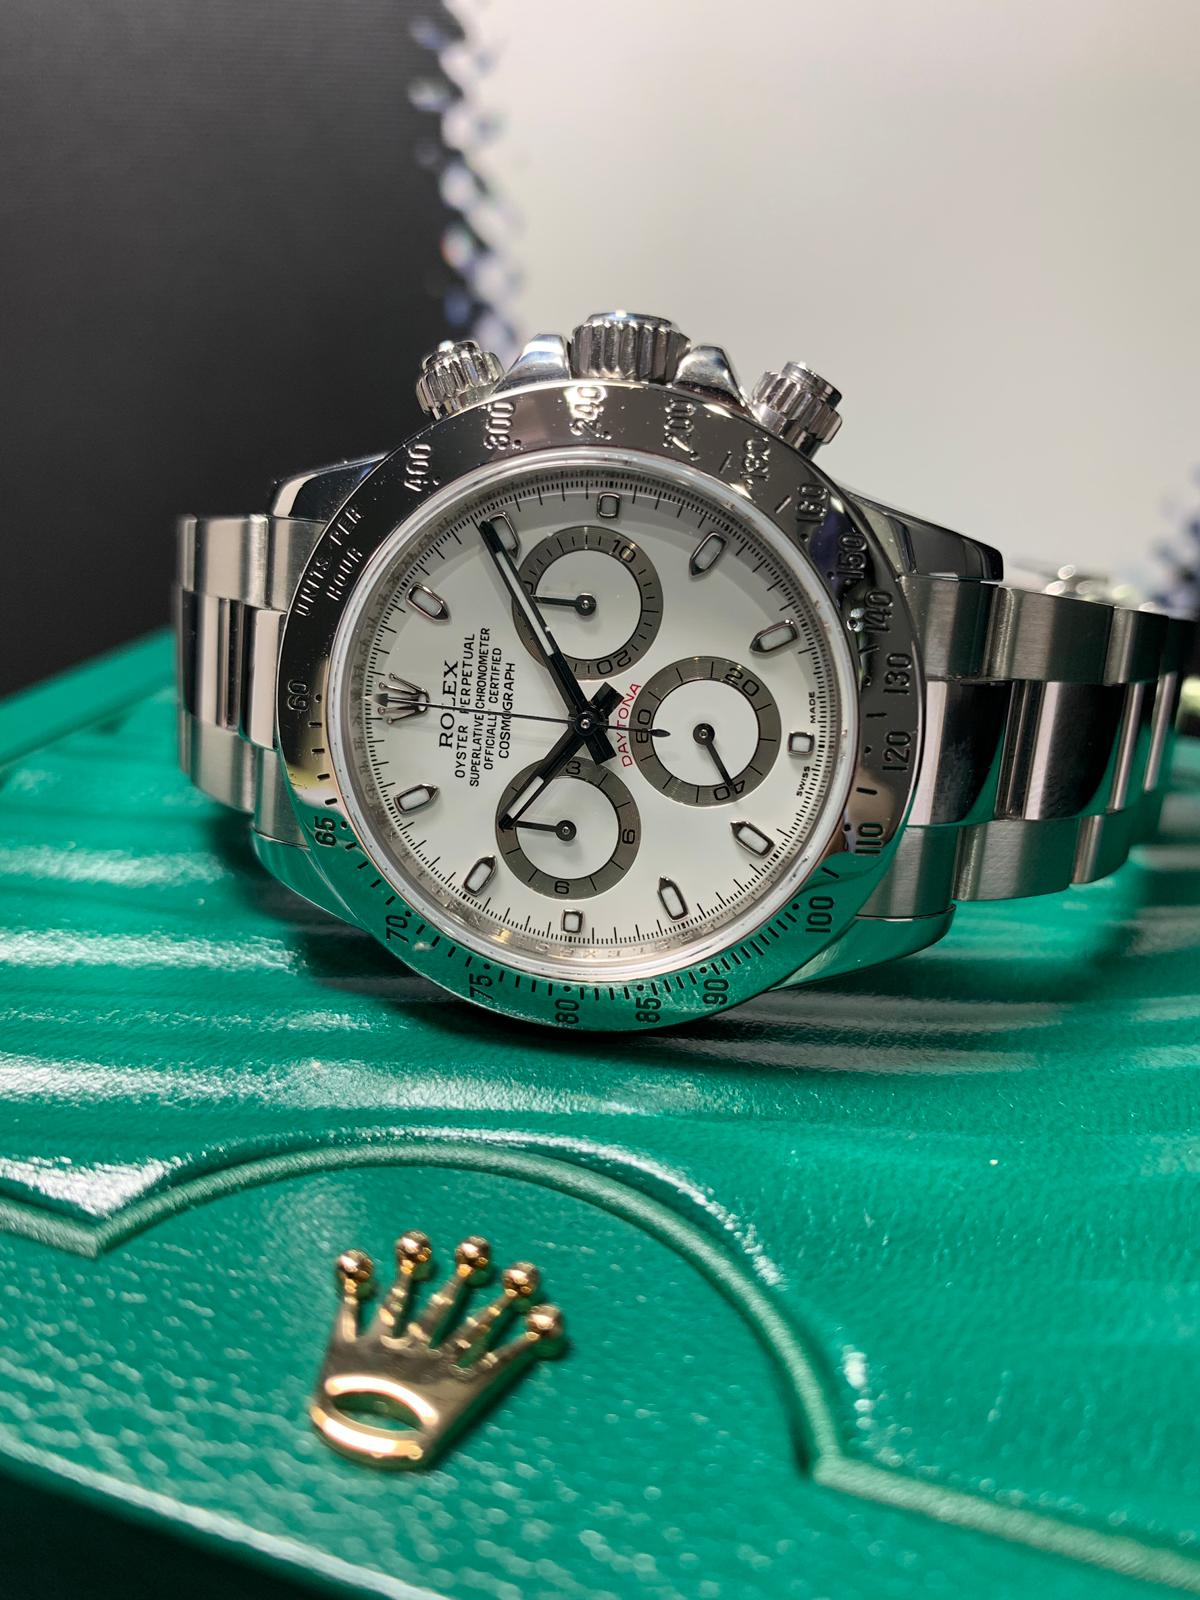 ROLEX COSMOGRAPH DAYTONA 116520 STAINLESS STEEL - Carr Watches Rolex Cosmograph Daytona Stainless Steel Price